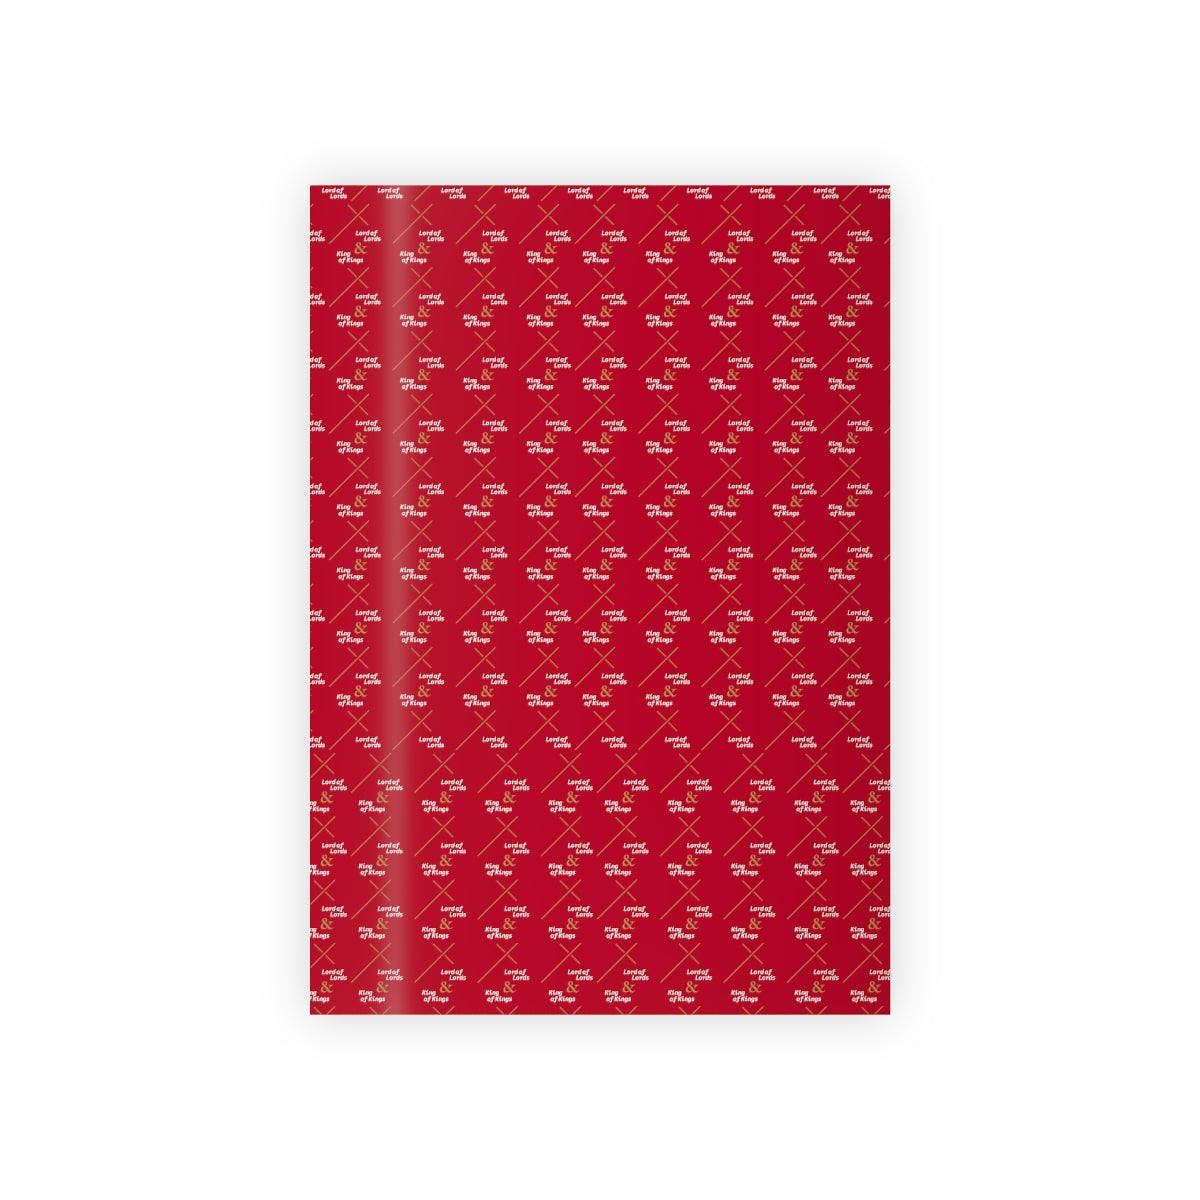 Christ-centered Christian Christmas Wrapping Paper - Lord of Lords